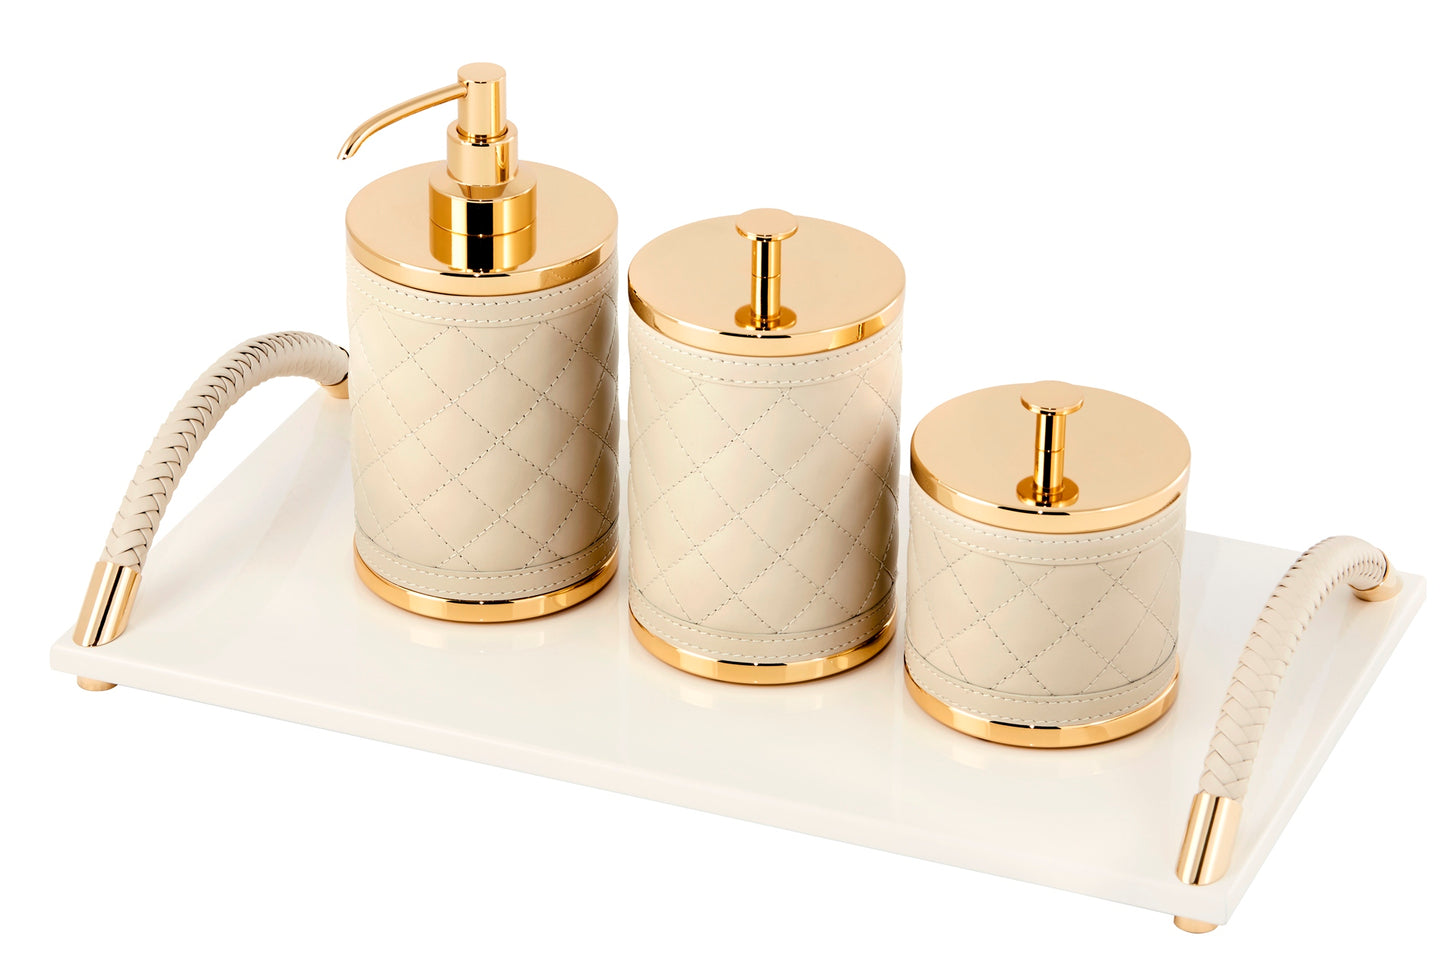 Riviere Dalia Lacquer Rectangular Tray | Lacquered Tray | Handwoven Leather Curved Handles | Chrome or Gold Details | Elegant Home Decor Addition | Find Luxury Home Accessories at 2Jour Concierge, #1 luxury high-end gift & lifestyle shop